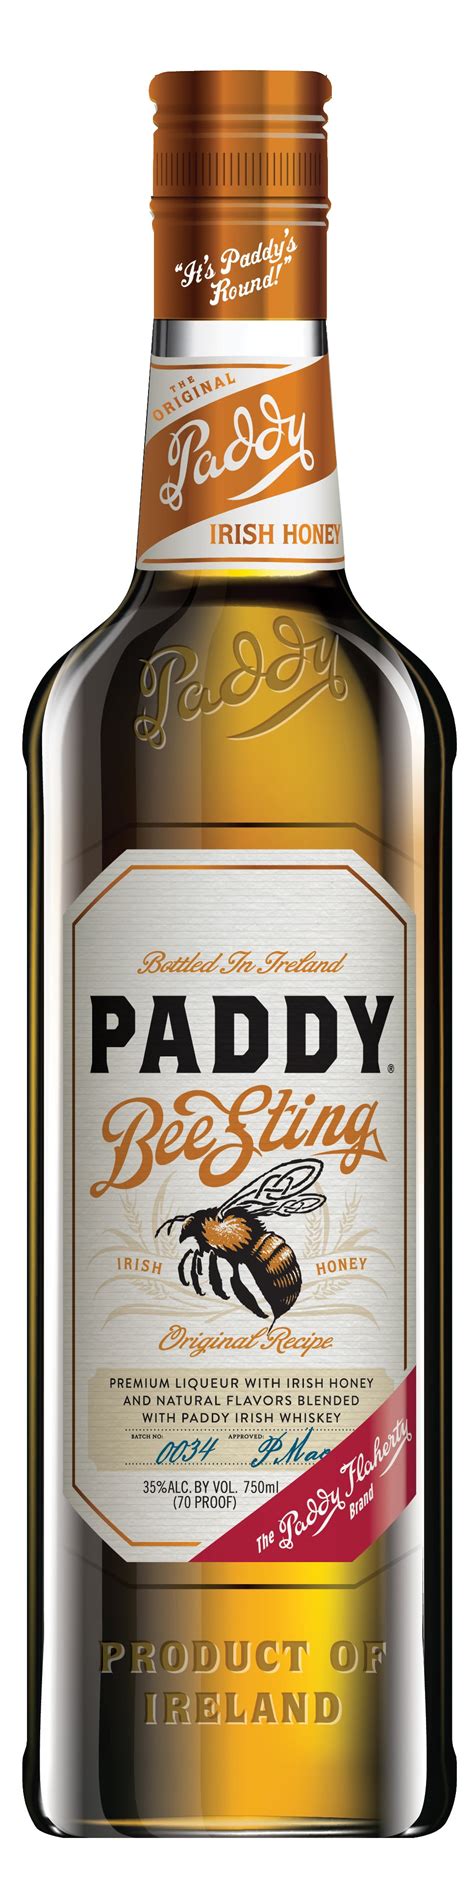 Paddy Irish Whiskey Introduces Two New Flavored Whiskeys The Beverage